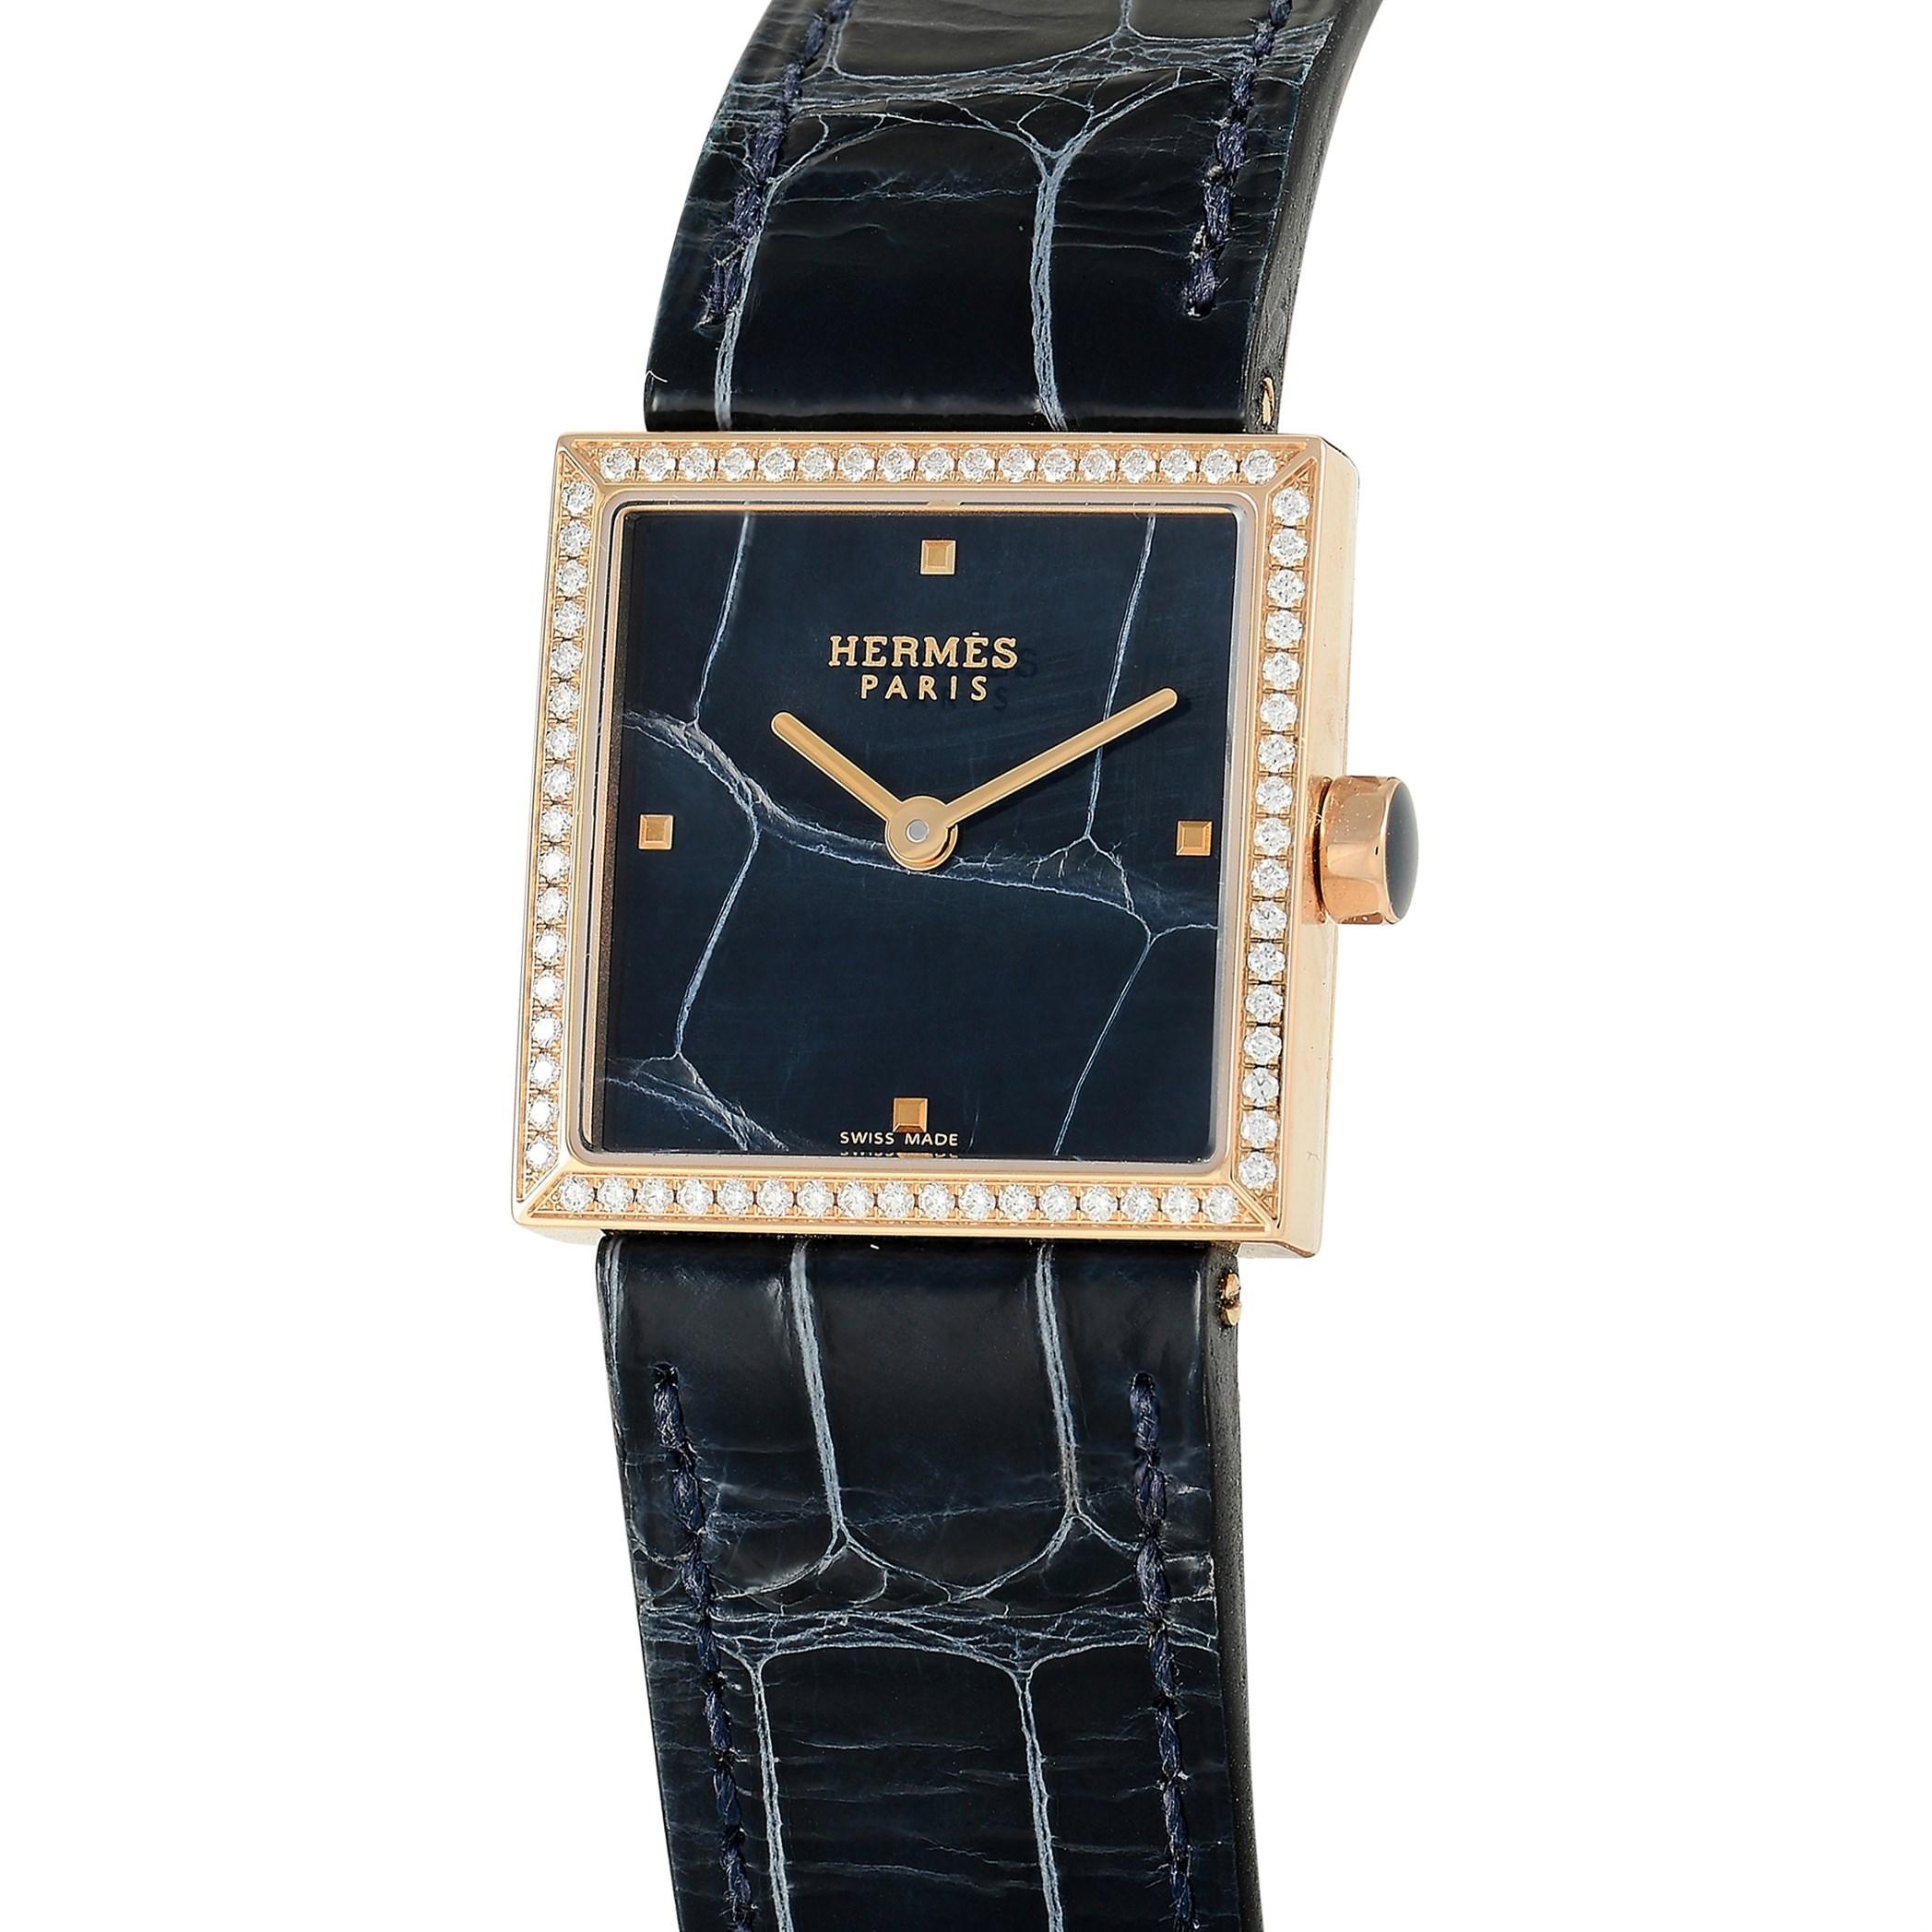 Hermès Carré Cuir Rose Gold Diamond Ladies Watch exudes the luxury brand’s commitment to opulent accessories.

Sleek and stylish, this timepiece features a 24mm x 24mm square case crafted from 18K Rose Gold adorned with shimmering round-cut diamond